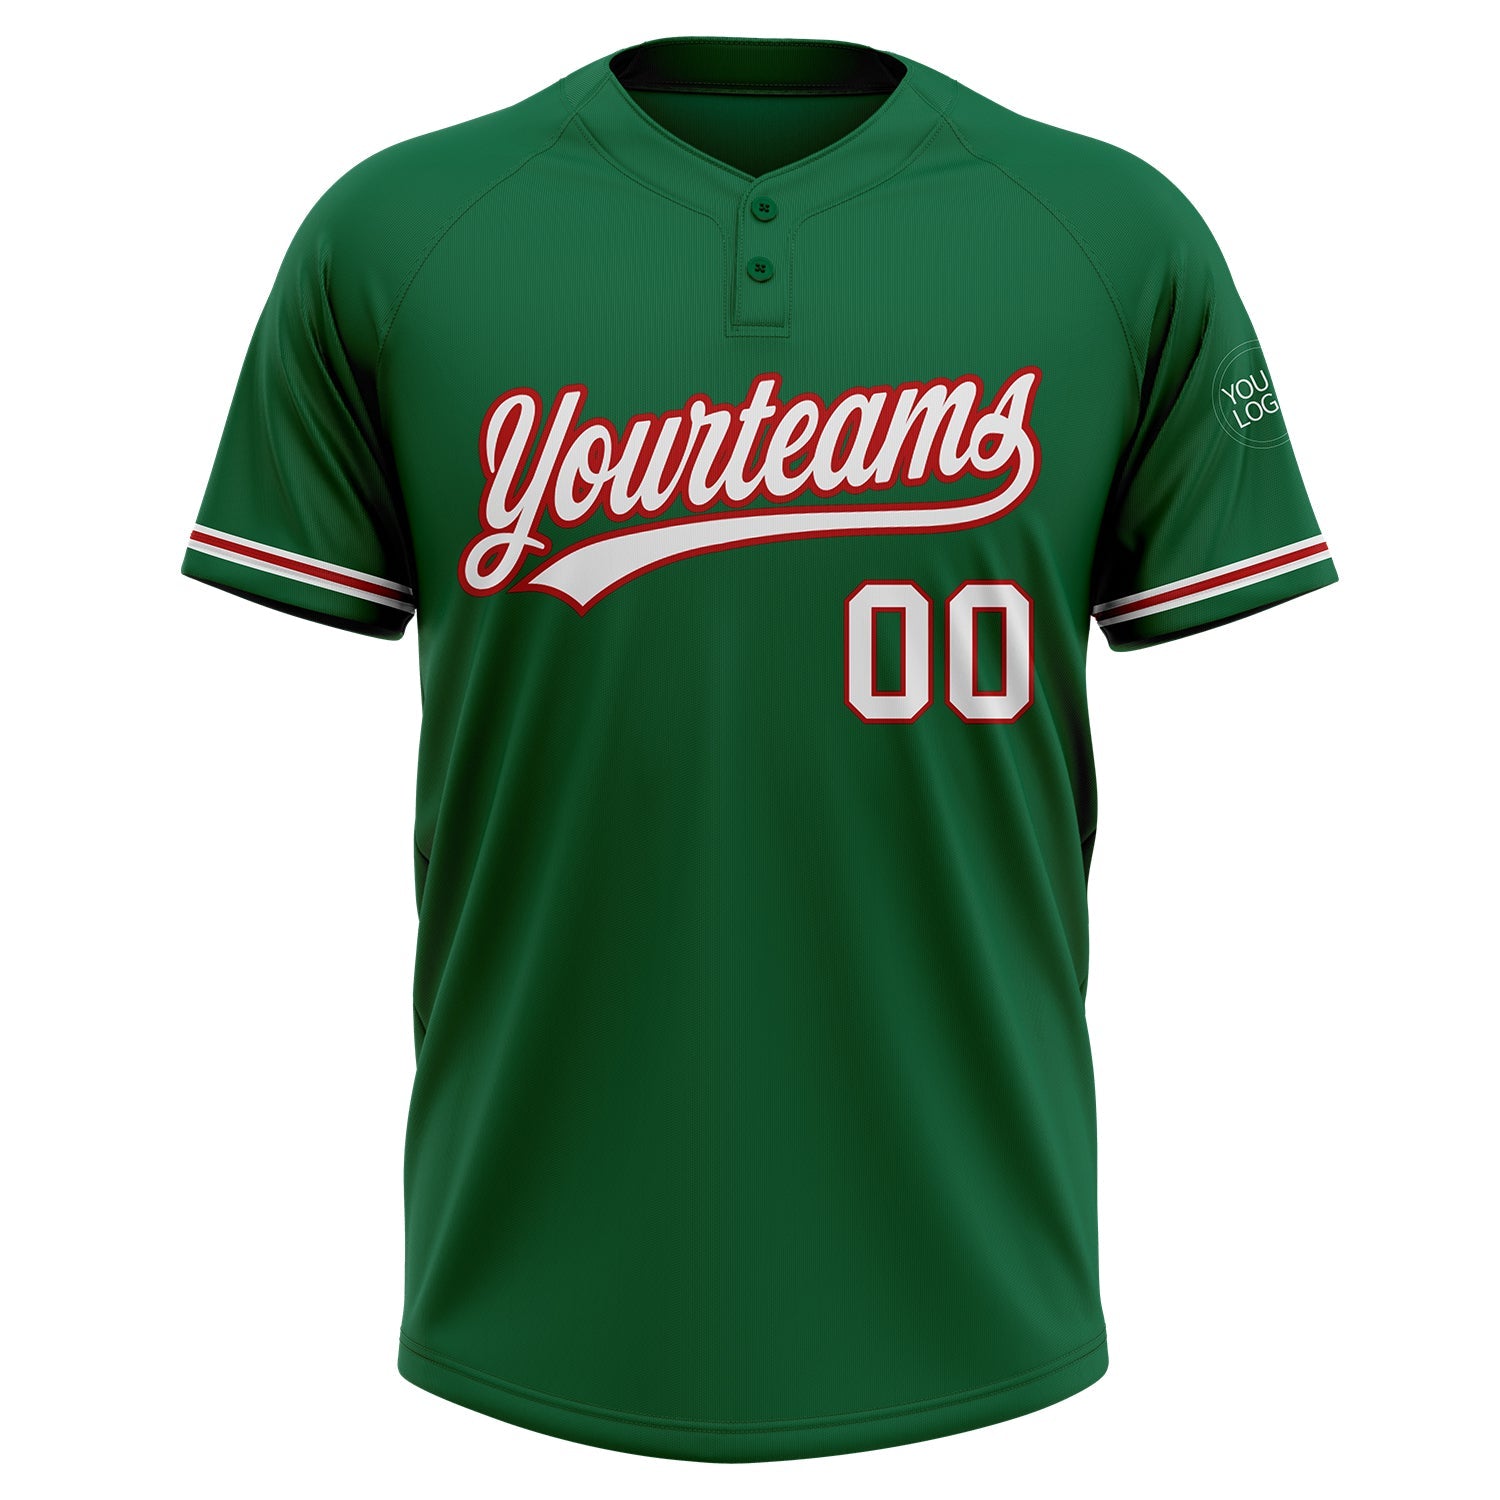 Custom Kelly Green White-Red Two-Button Unisex Softball Jersey